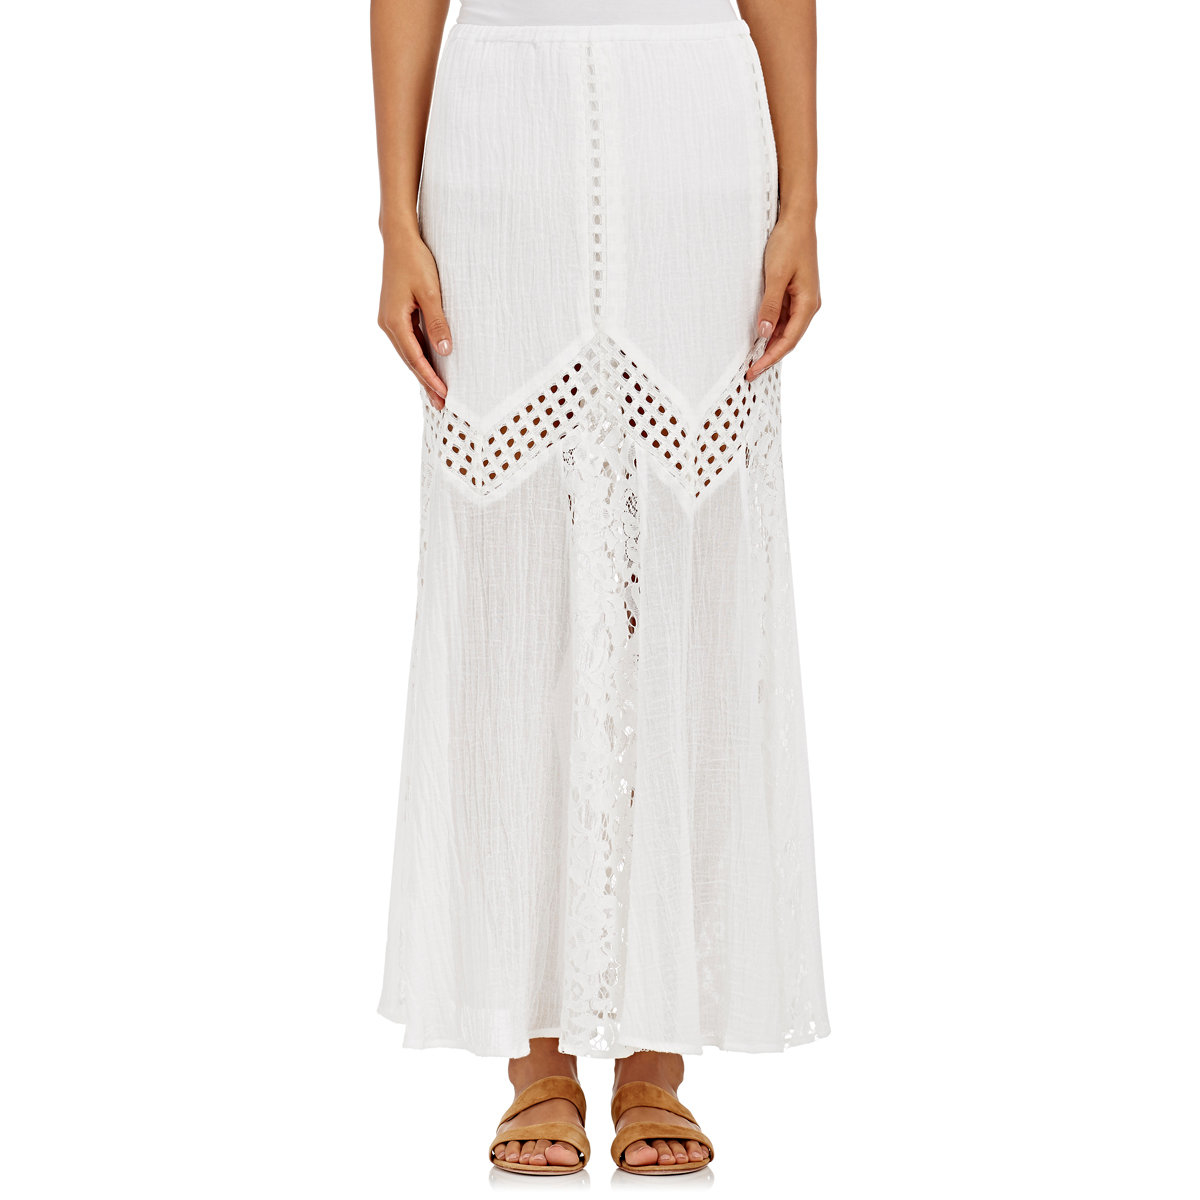 Skin Cotton Lace Gauze Maxi Skirt in White | Lyst